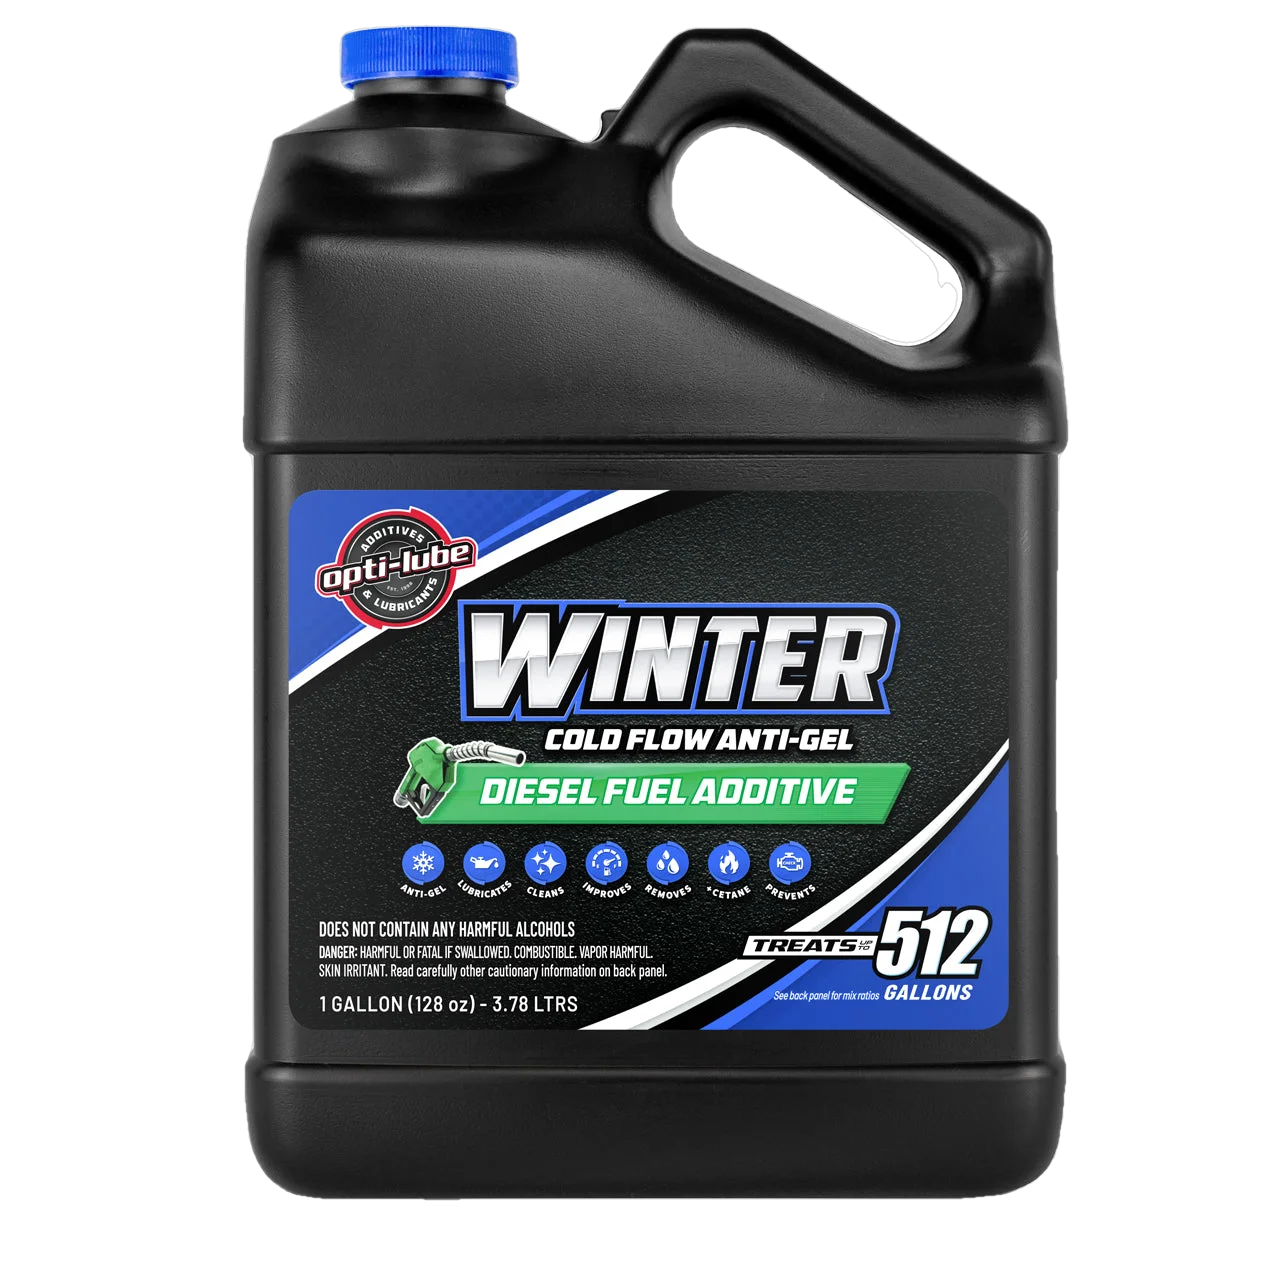 Opti-Lube Winter Anti-Gel Diesel Fuel Additive: 1 Gallon with Accessories, (1 Plastic Hand Pump and 2 Empty 8oz Bottles) Treats up to 512 Gallons